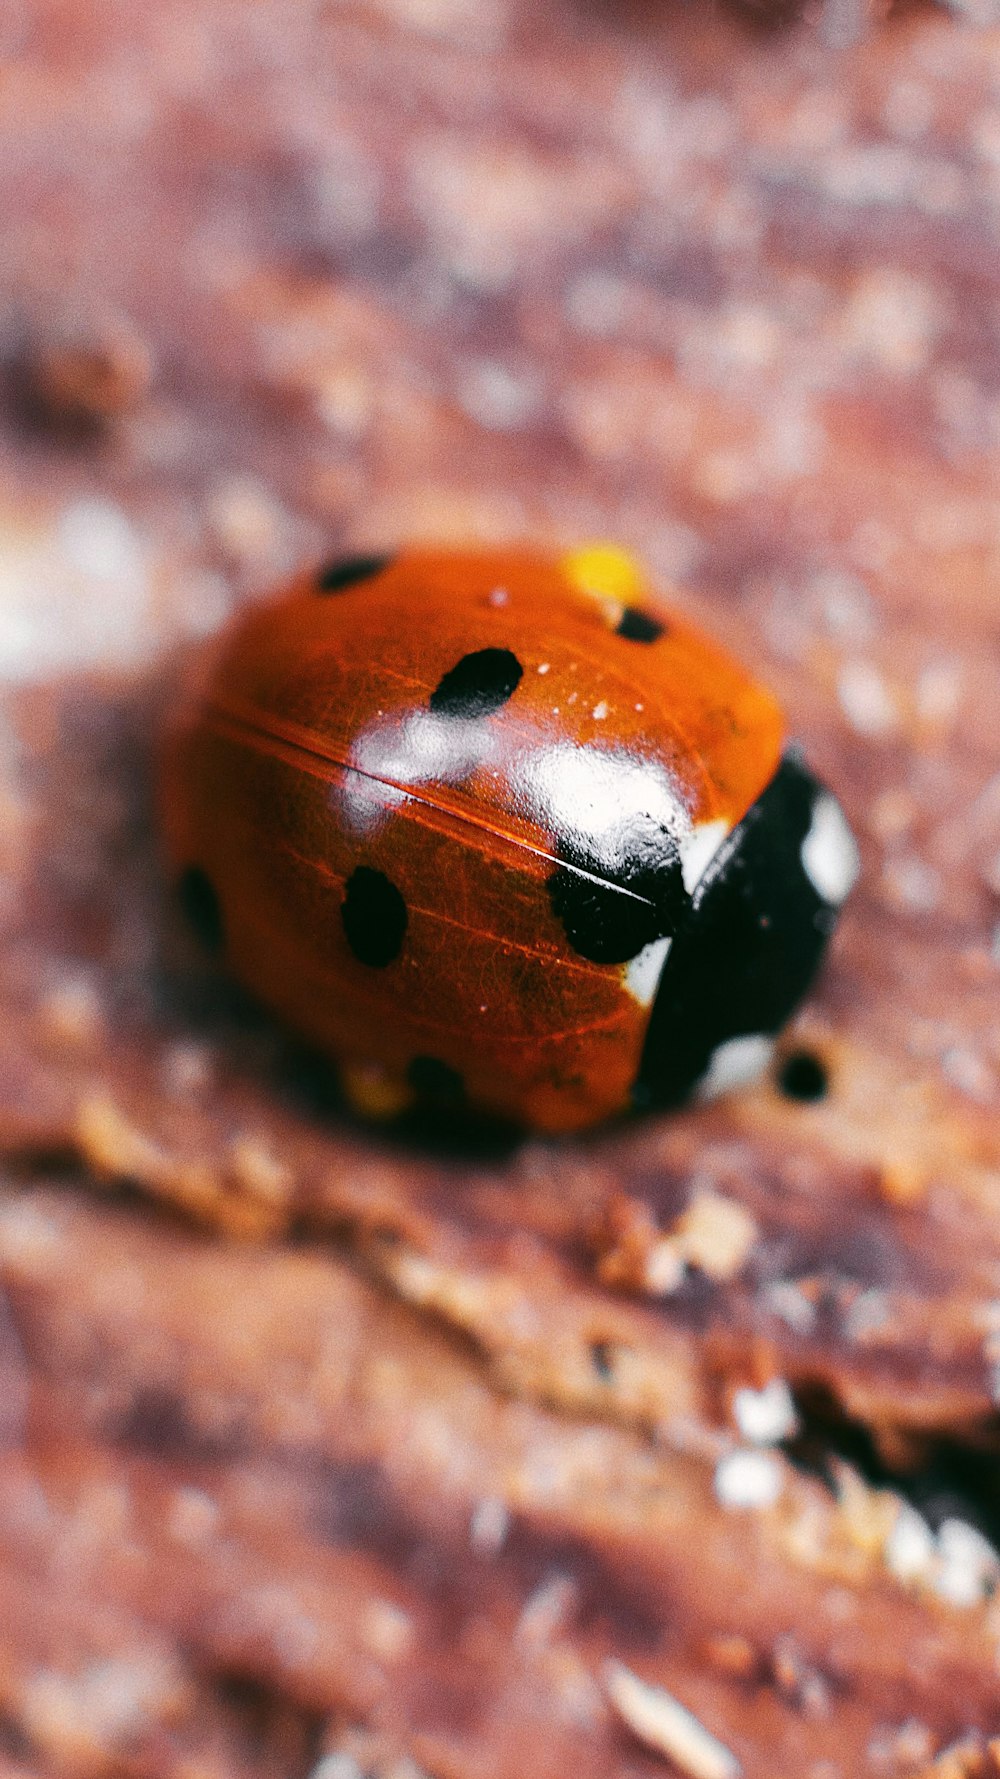 red and black ladybug on brown sand in close up photography during daytime